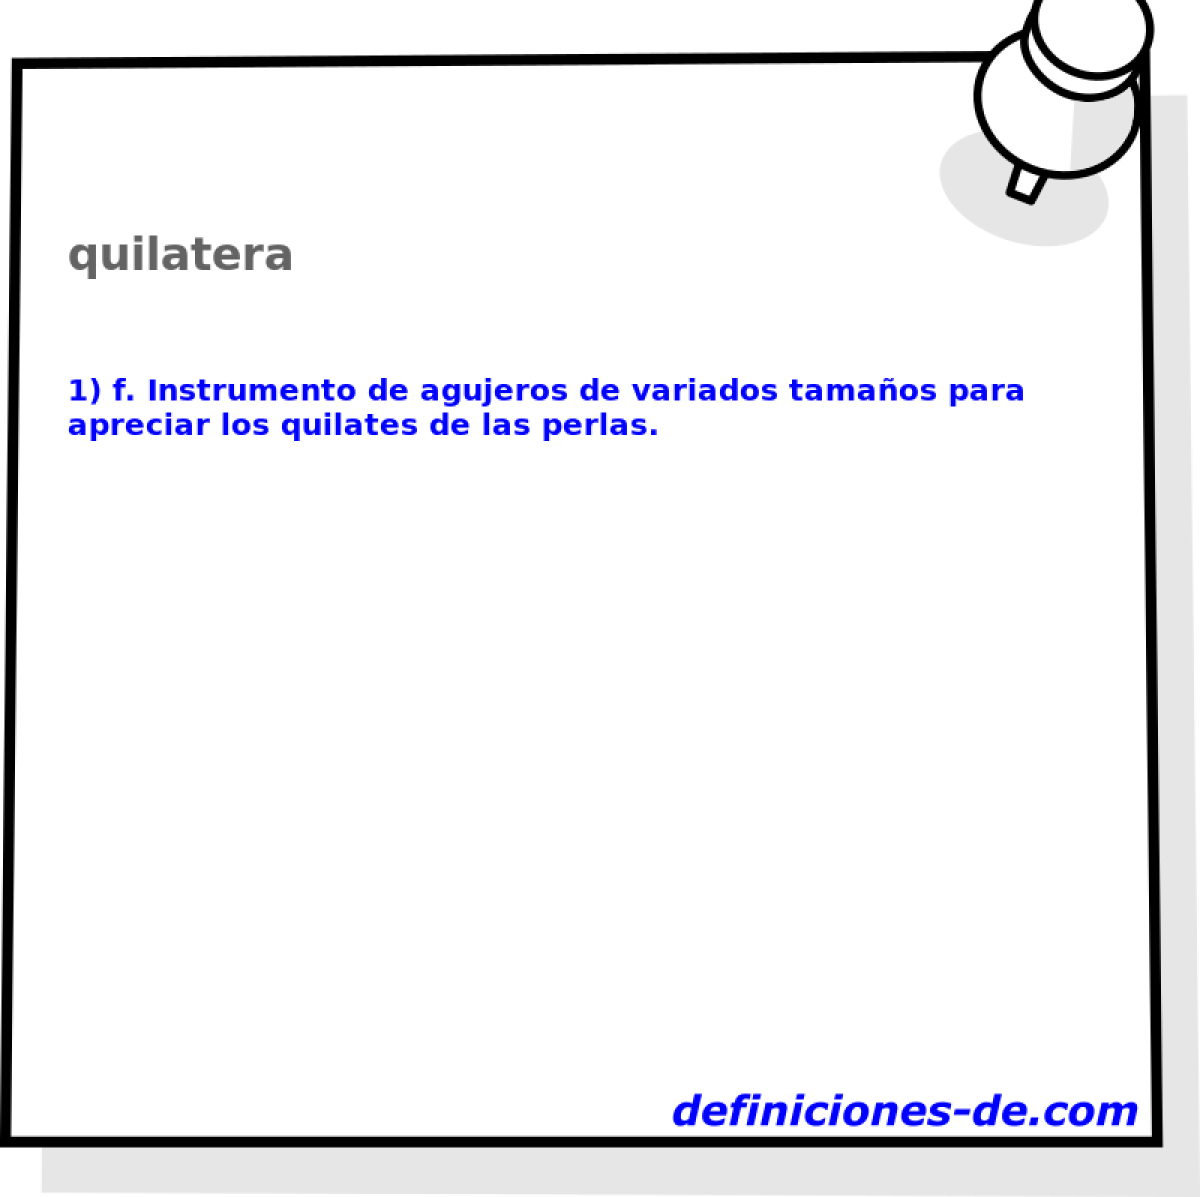 quilatera 